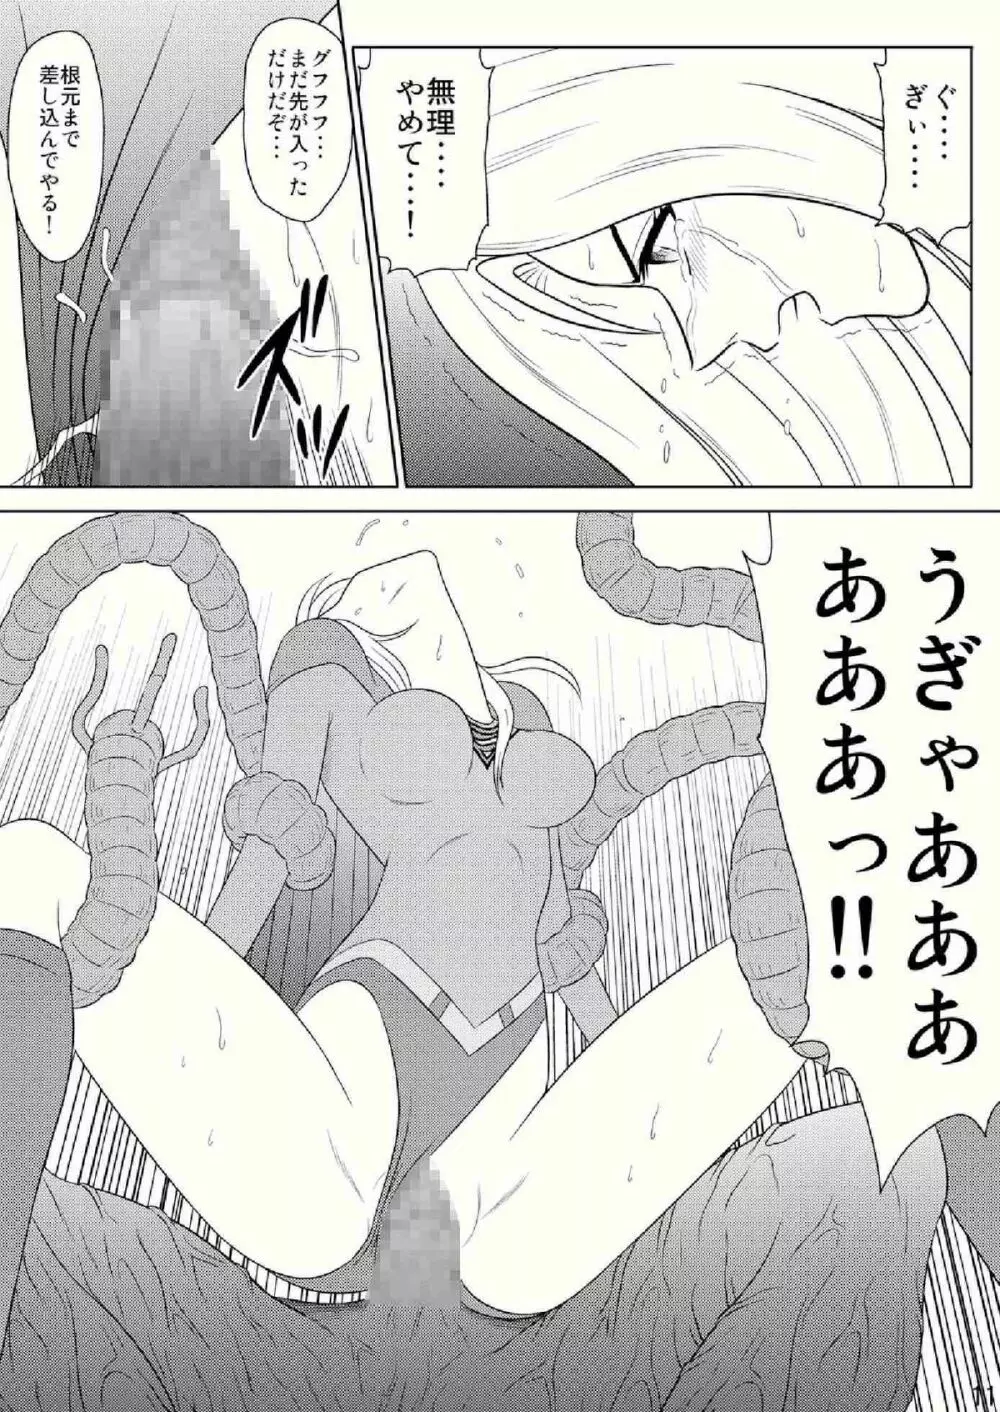 Toukikoubou vol.2 SUPER GIRL - Humiliation and Execution - Page.11